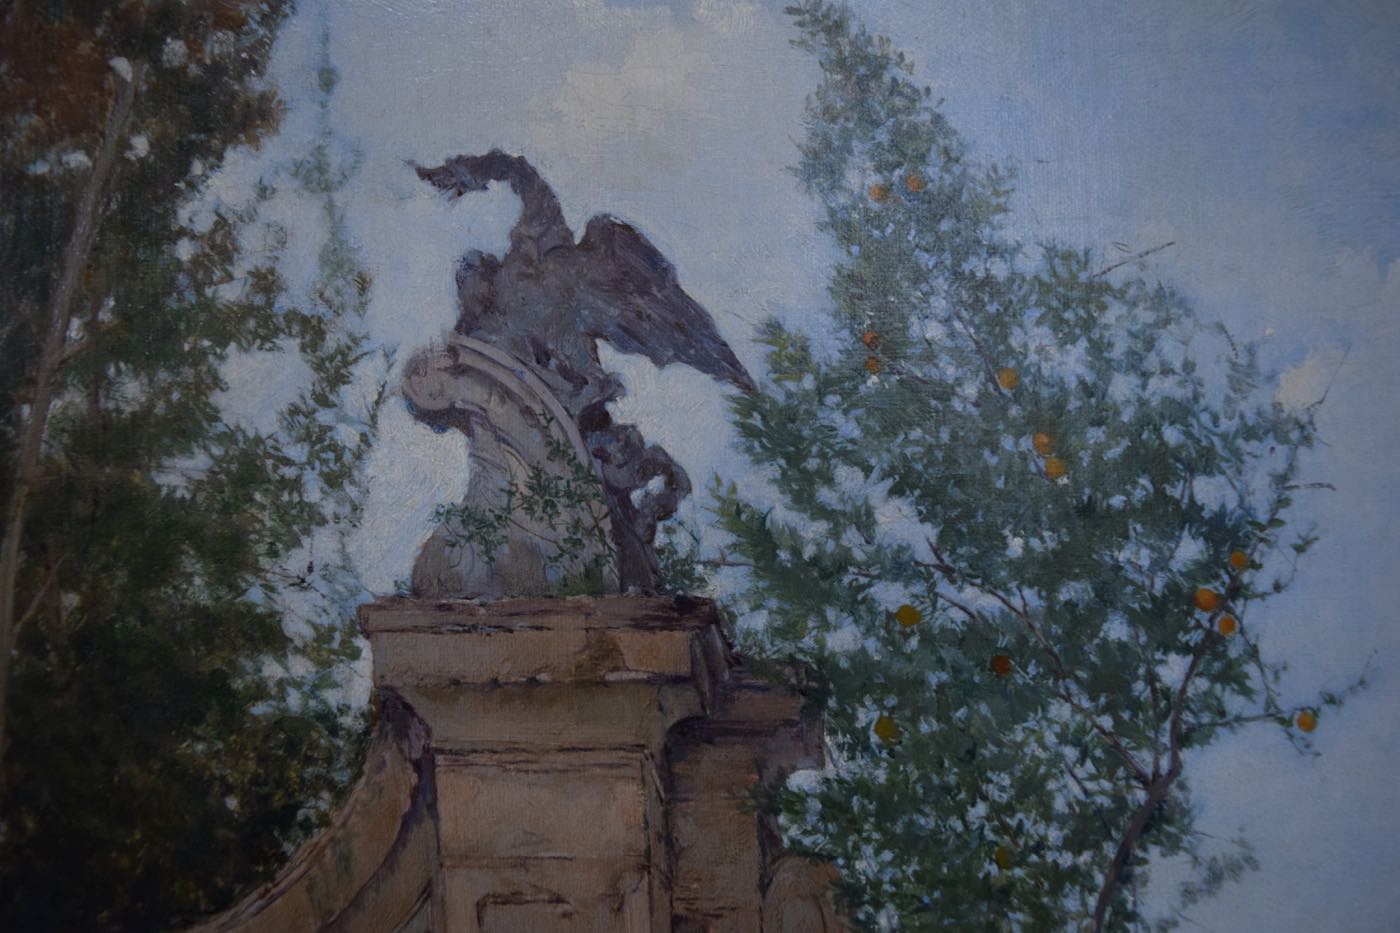 At the Villa Borghese by Lorenzo Valles